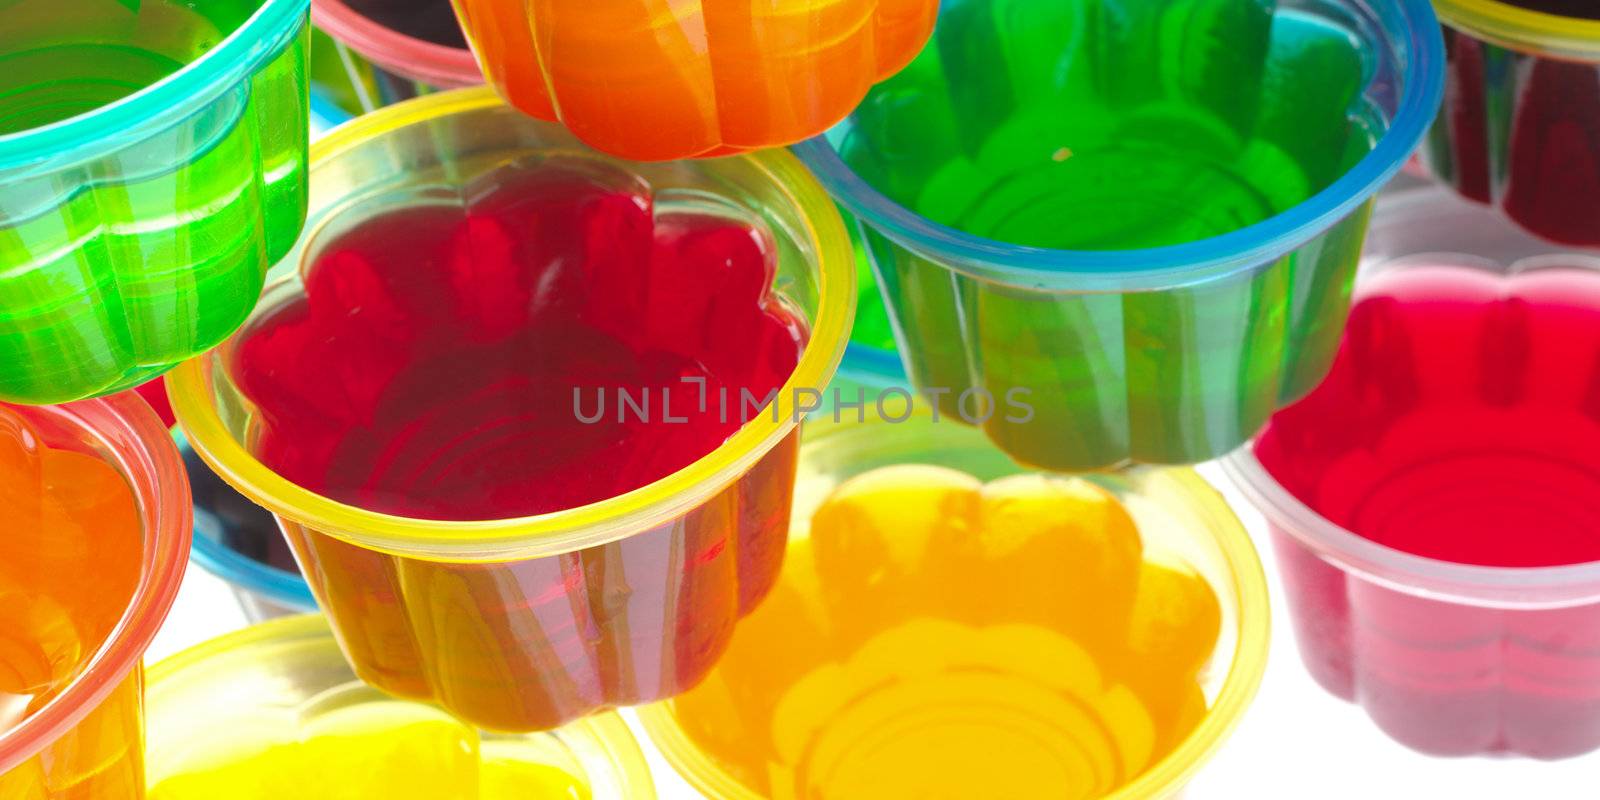 Colorful jellies in plastic bowls arranged in a pile and photographed from above (Selective Focus, Focus on the rim of the left red jelly) 